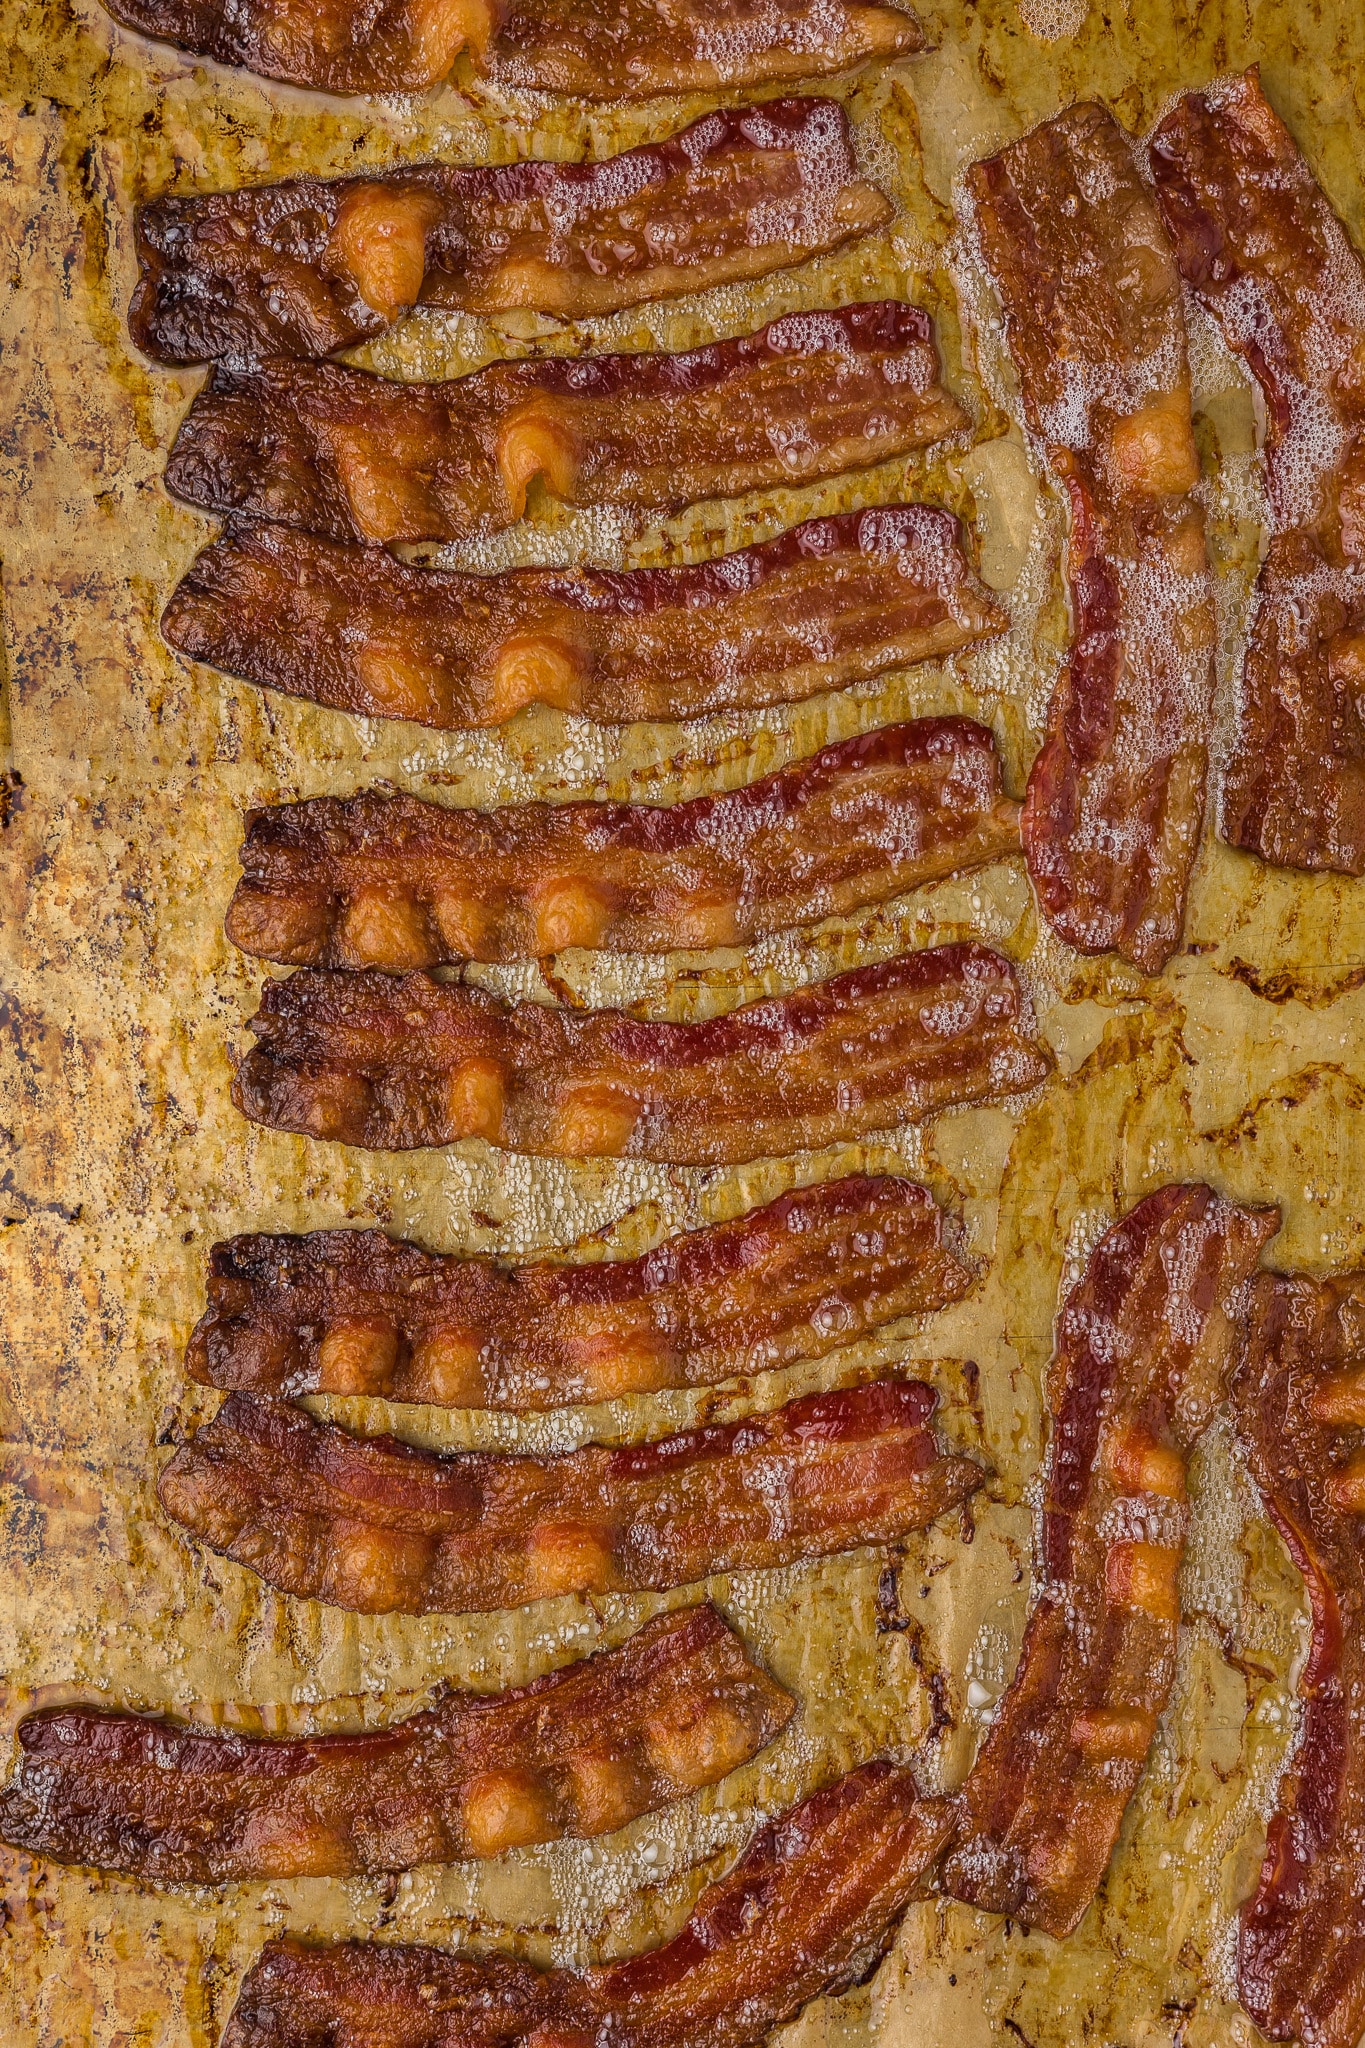 Cooked bacon on a cookie sheet.